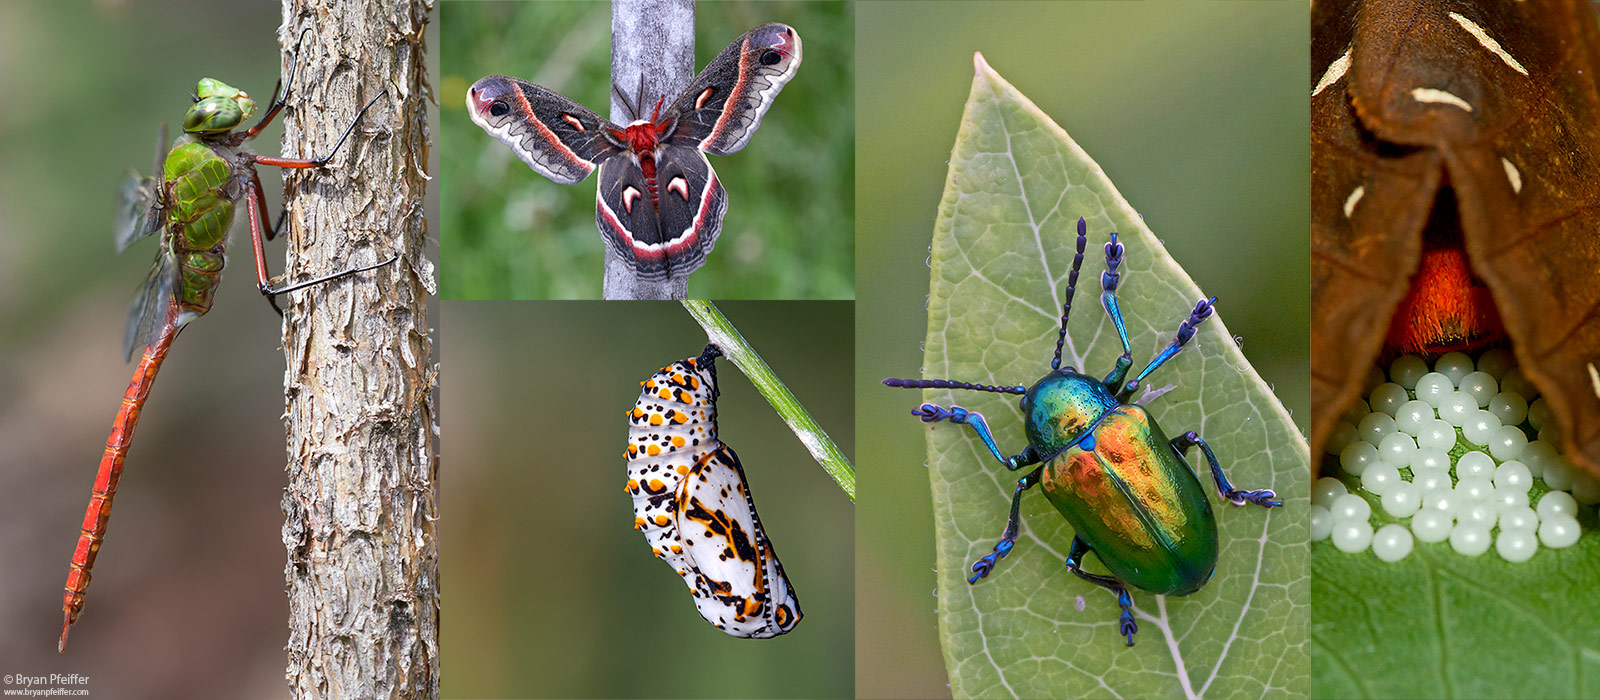 Insects for Birders with Bryan Pfeiffer